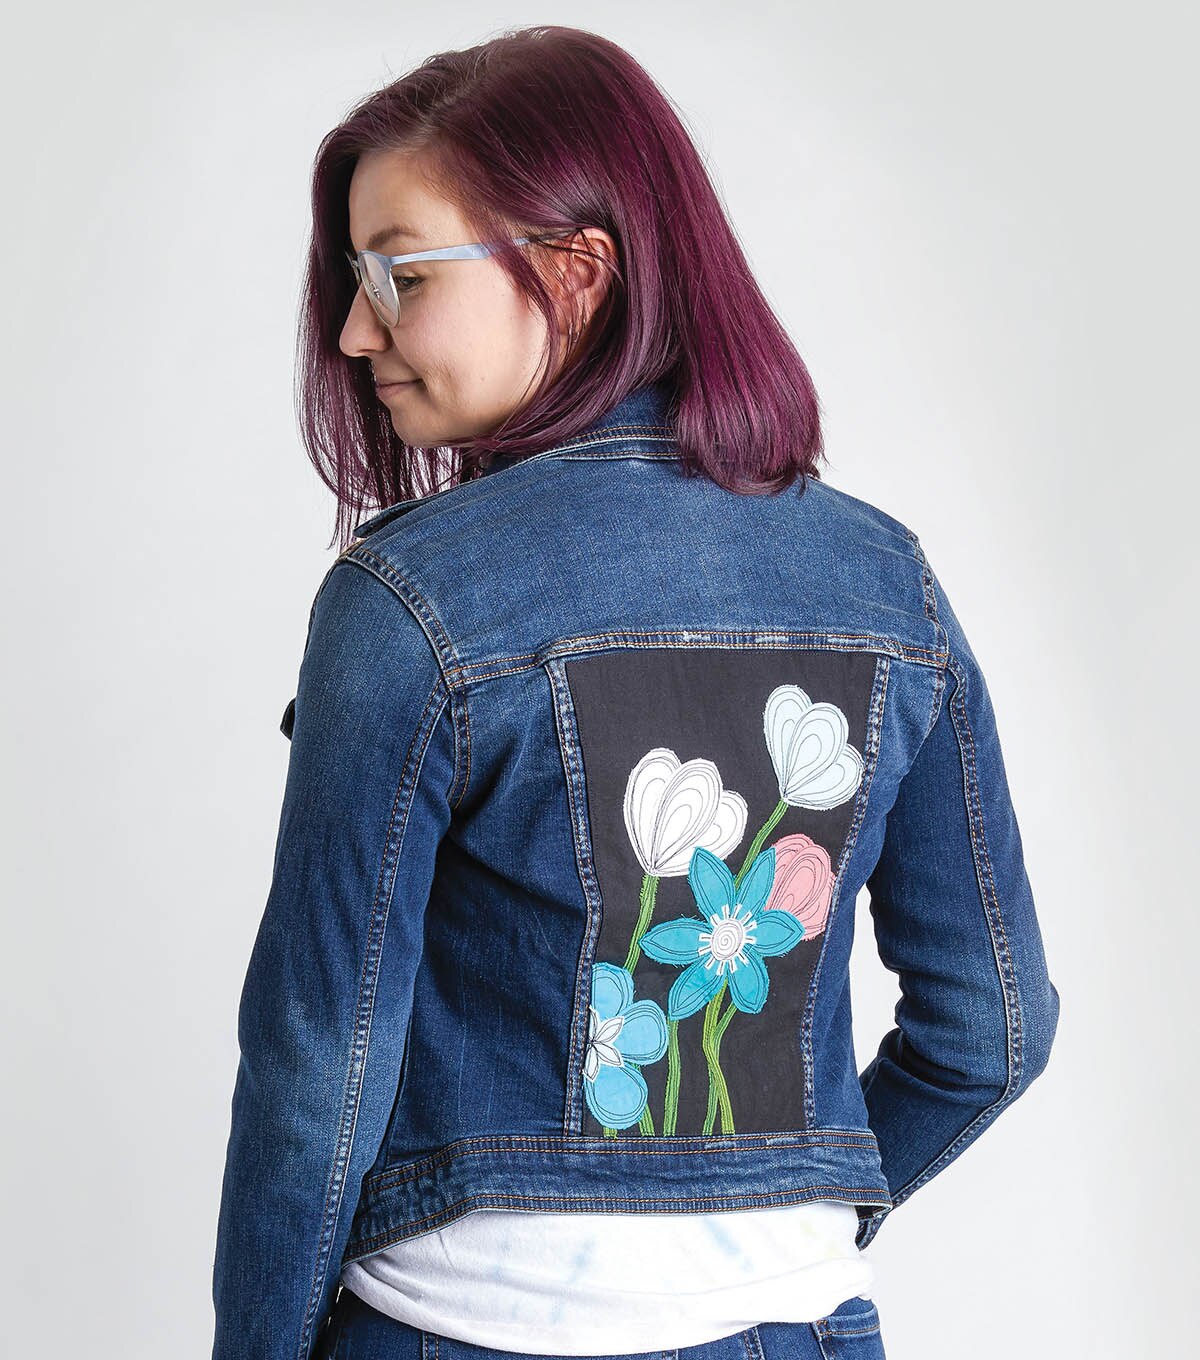 How To Make A Fabric Patched Jean Jacket | JOANN